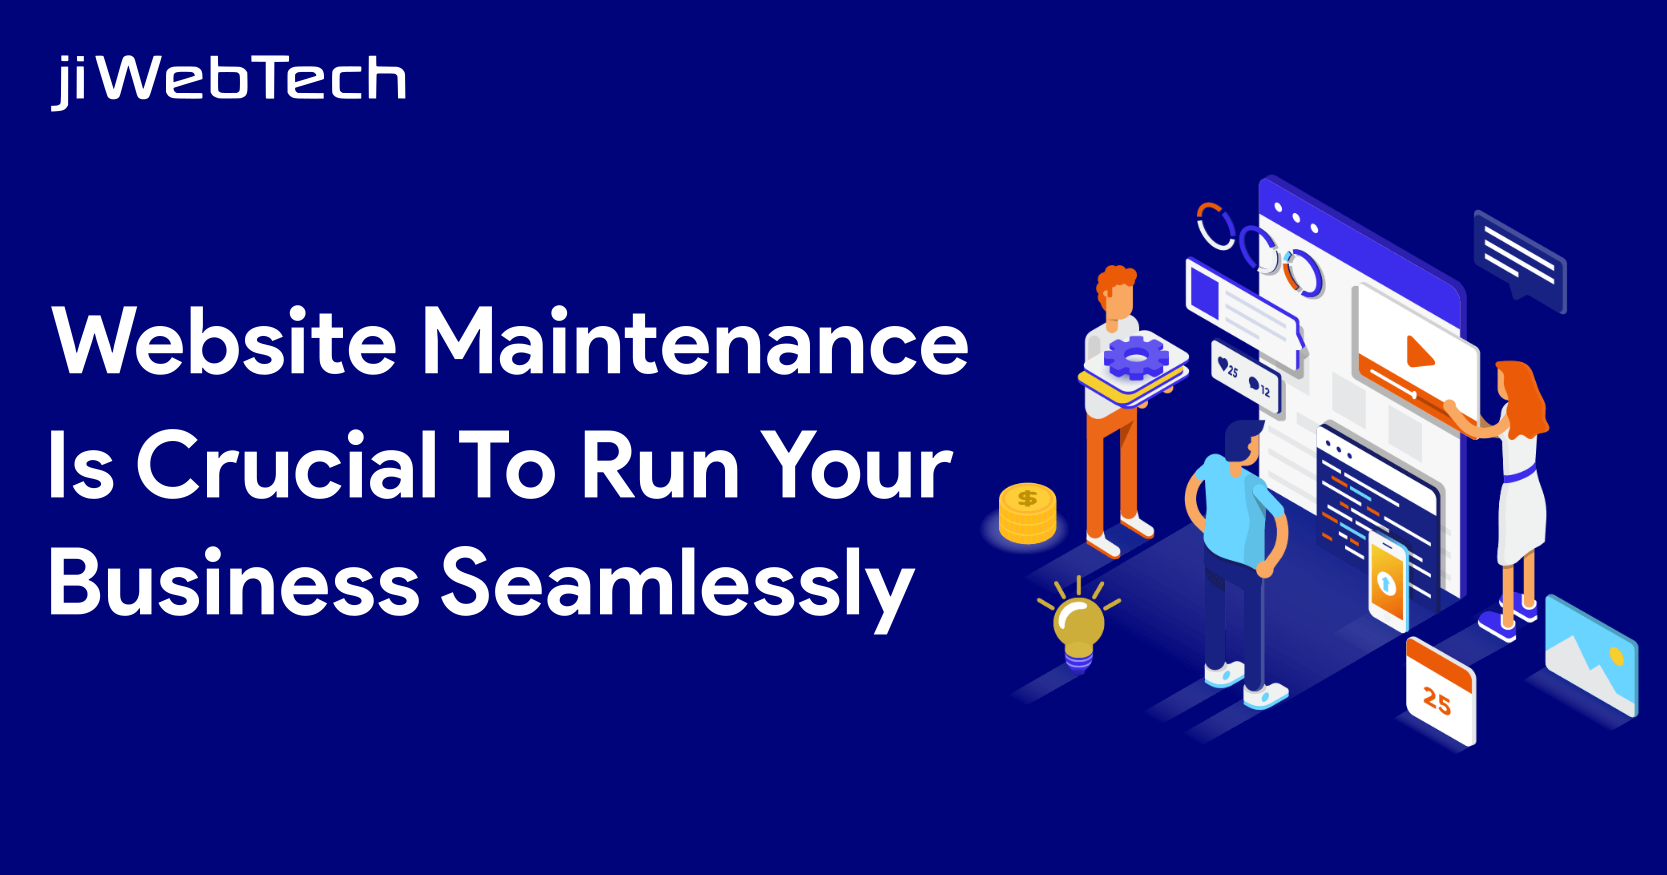 Why Website Maintenance is Crucial to Run Your Business Seamlessly?